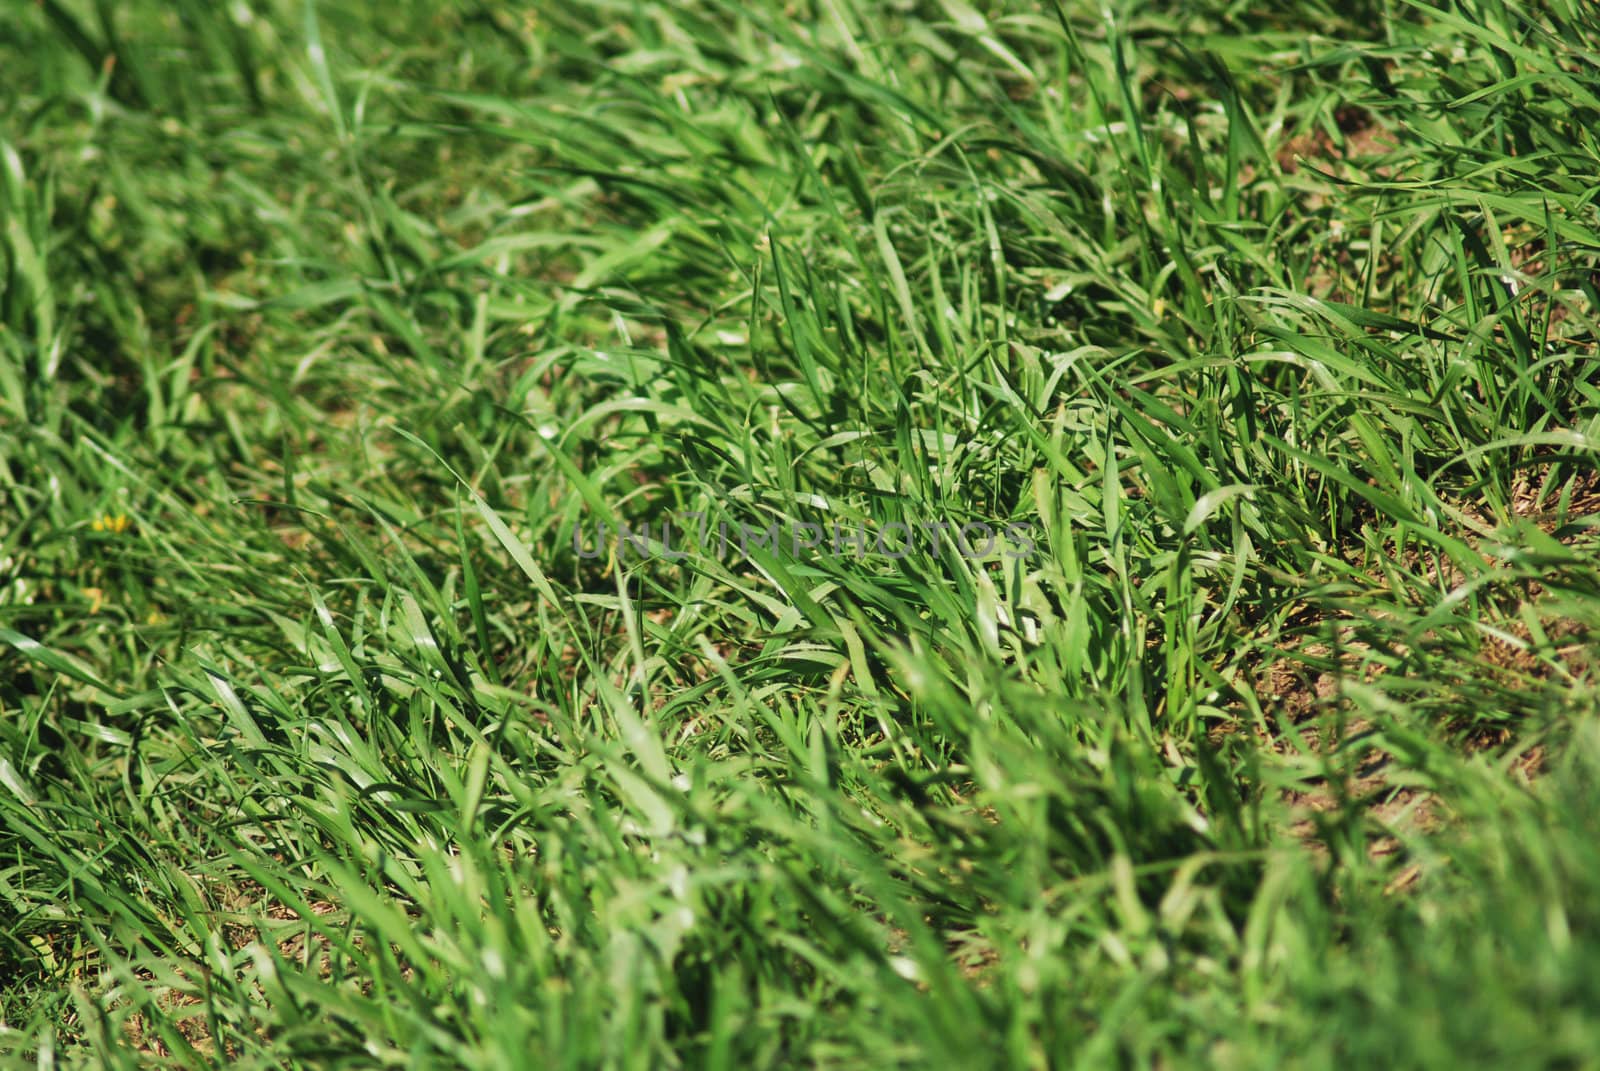 Green spring grass texture - nature background close up            by svtrotof